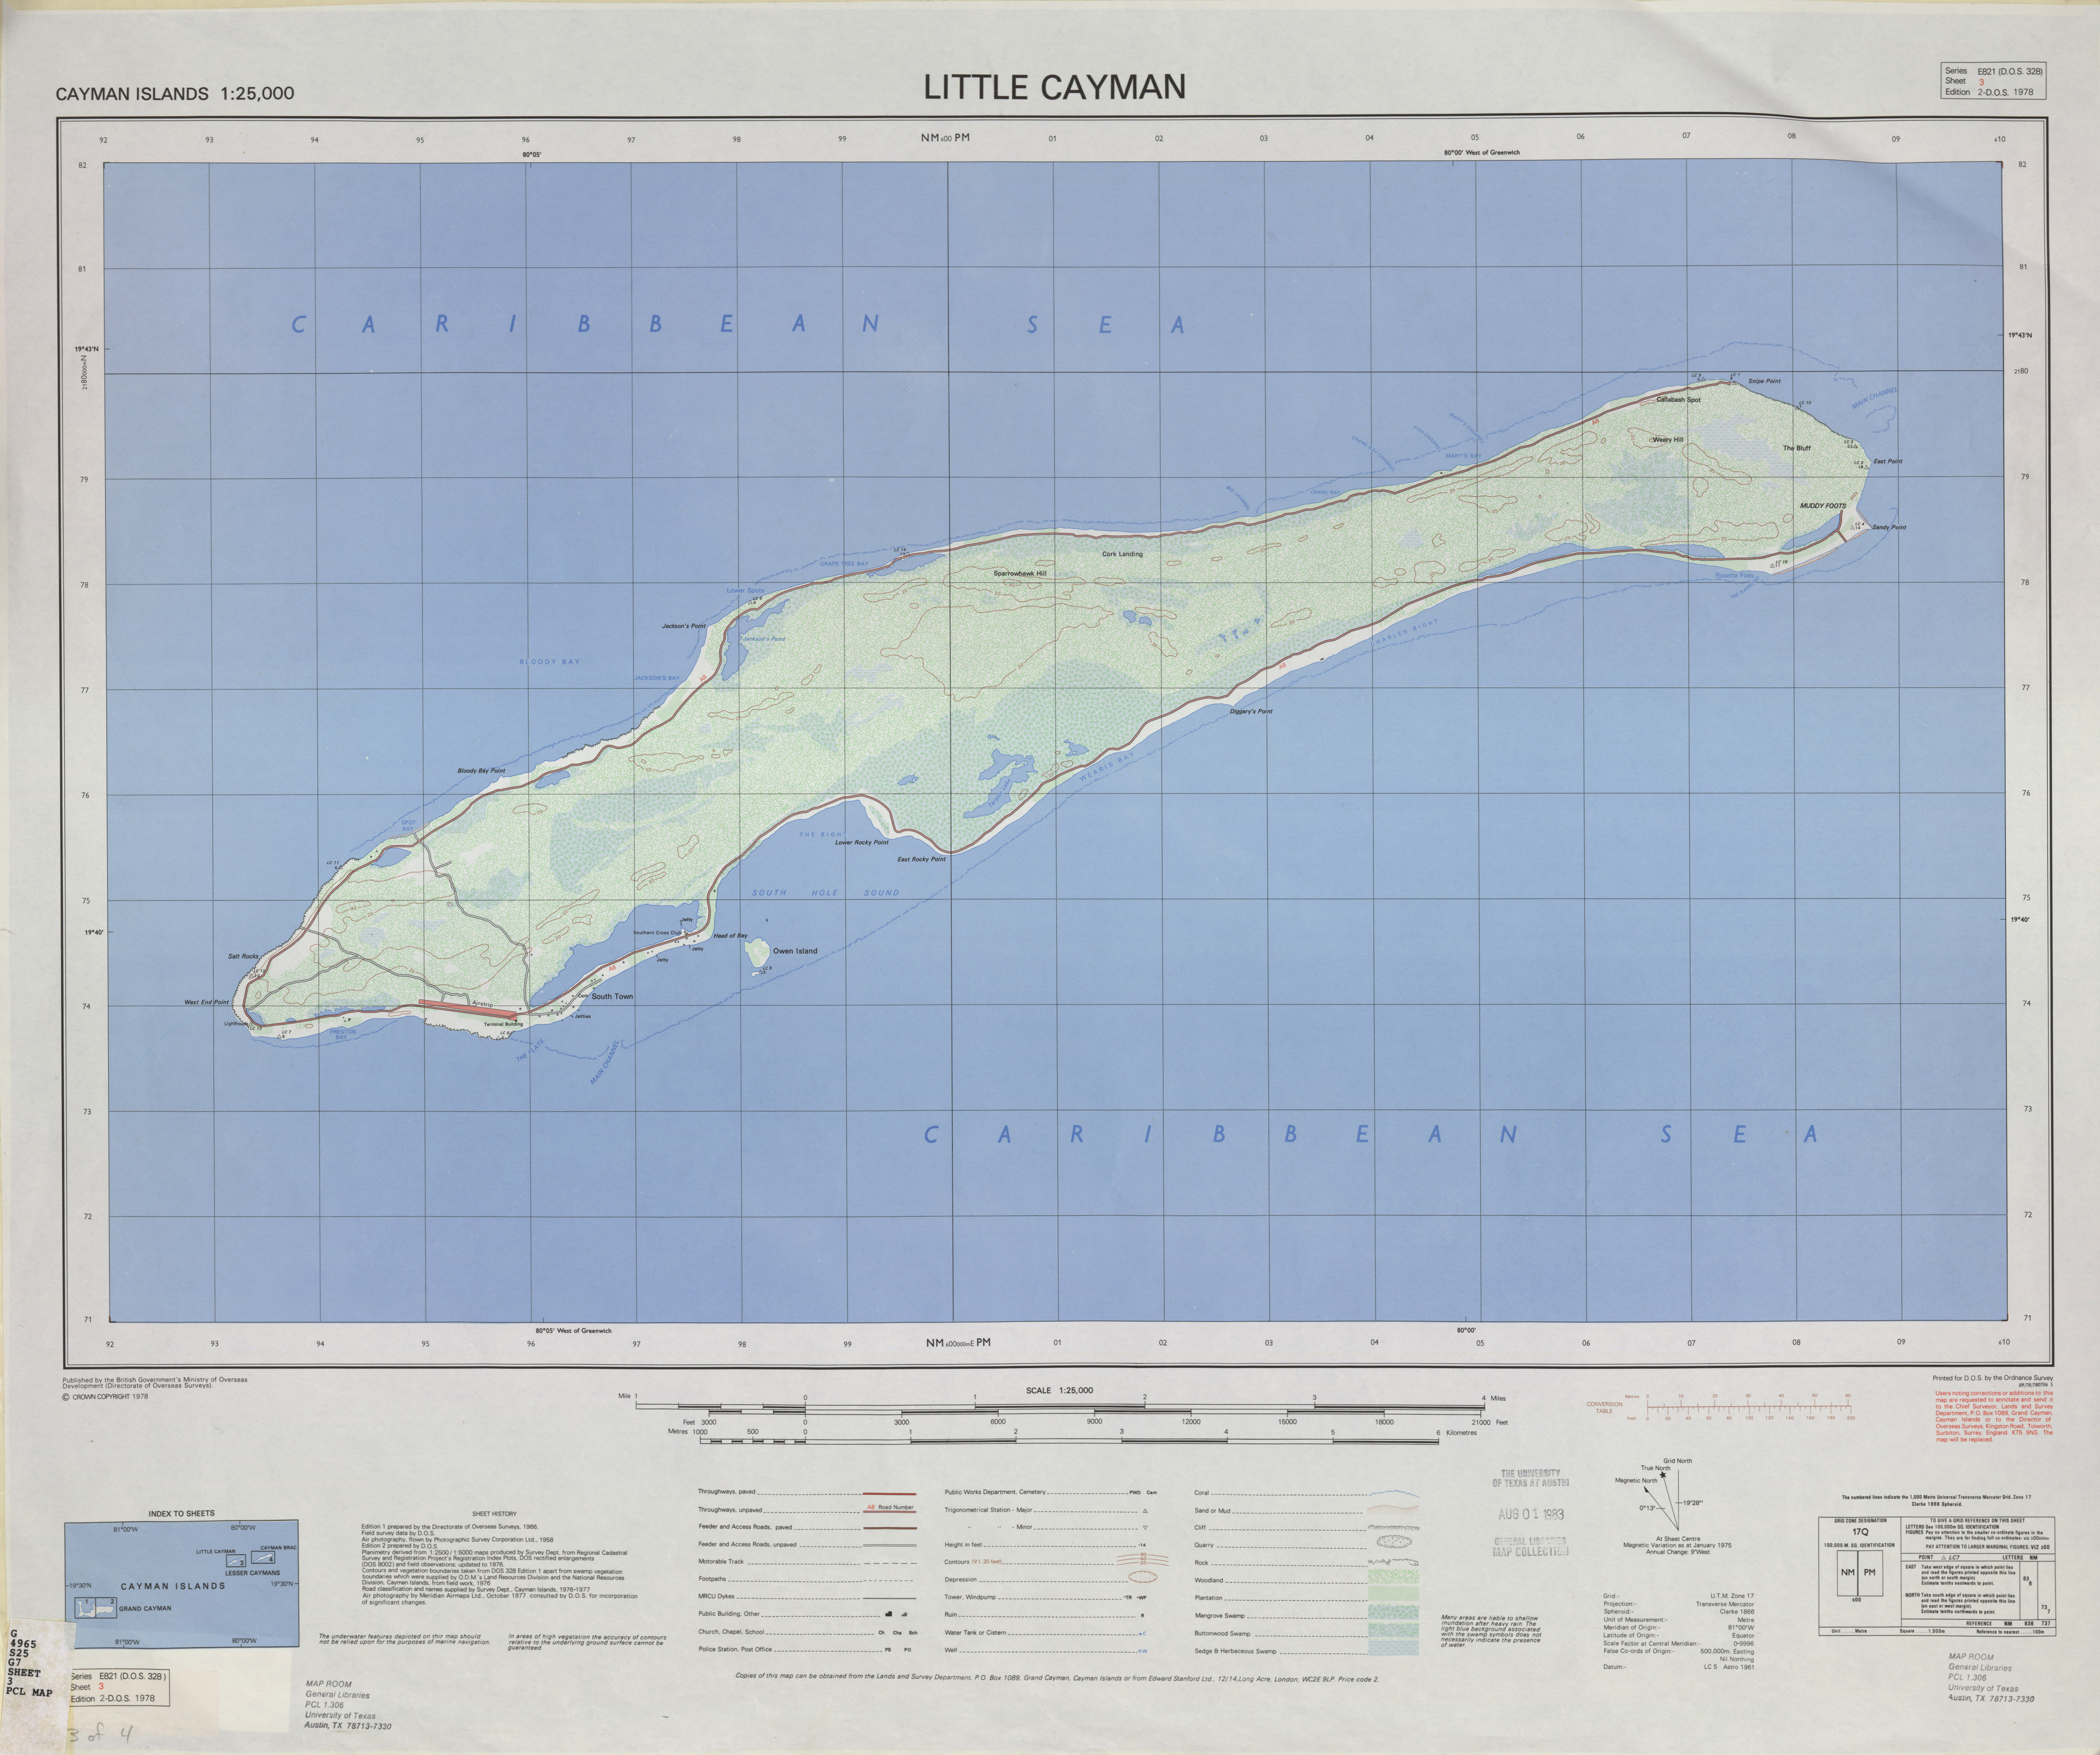 Cayman Islands Ams Topographic Maps Perry Castaa Eda Map Collection Ut Library Online